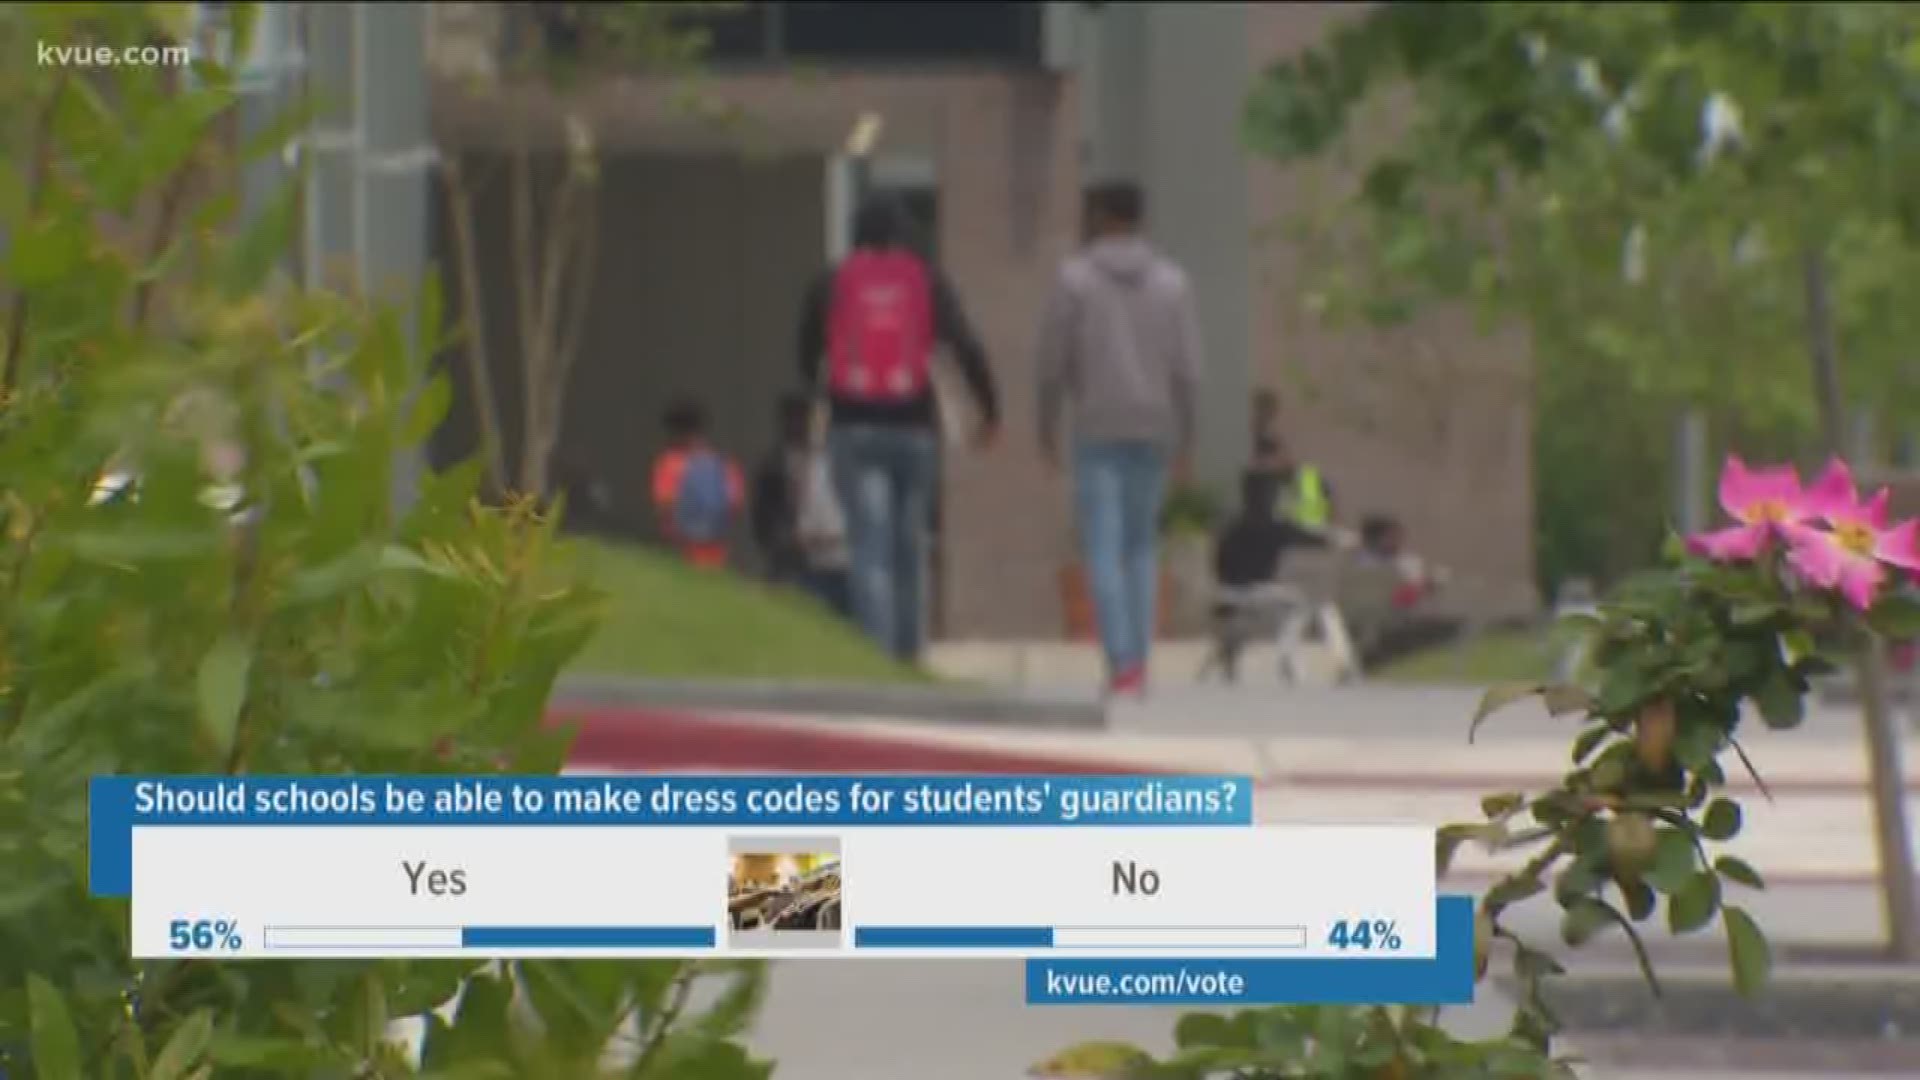 We're used to schools mandating dress codes for students, but one Texas high school is cracking down on parents. Should schools be able to make dress codes for guardians?